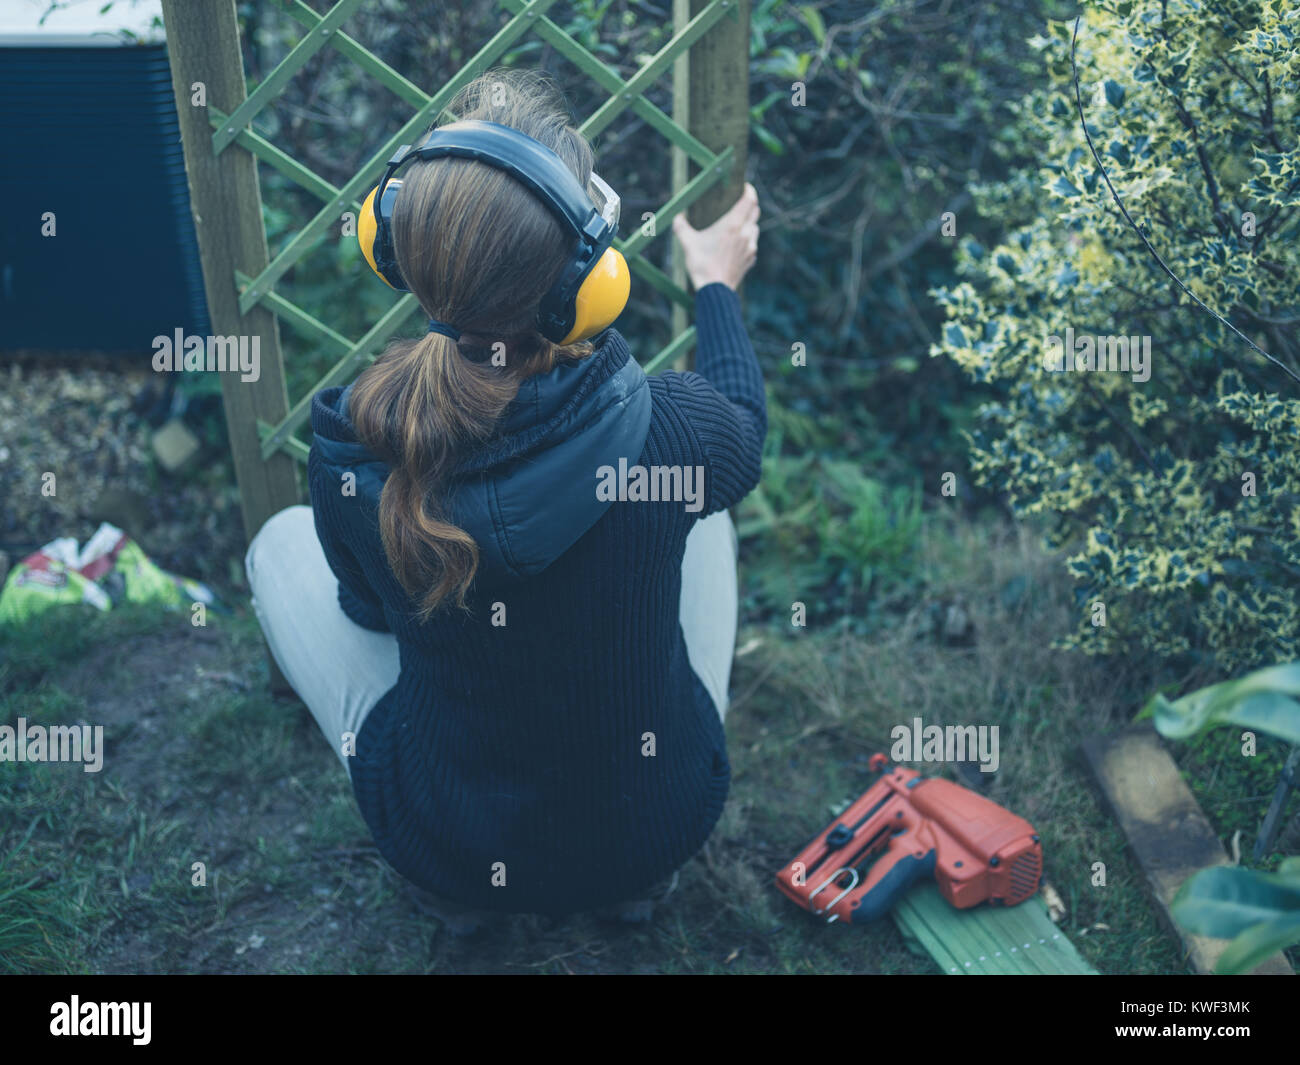 A young woman wearing ear muffs is building a fence in her garden Stock Photo